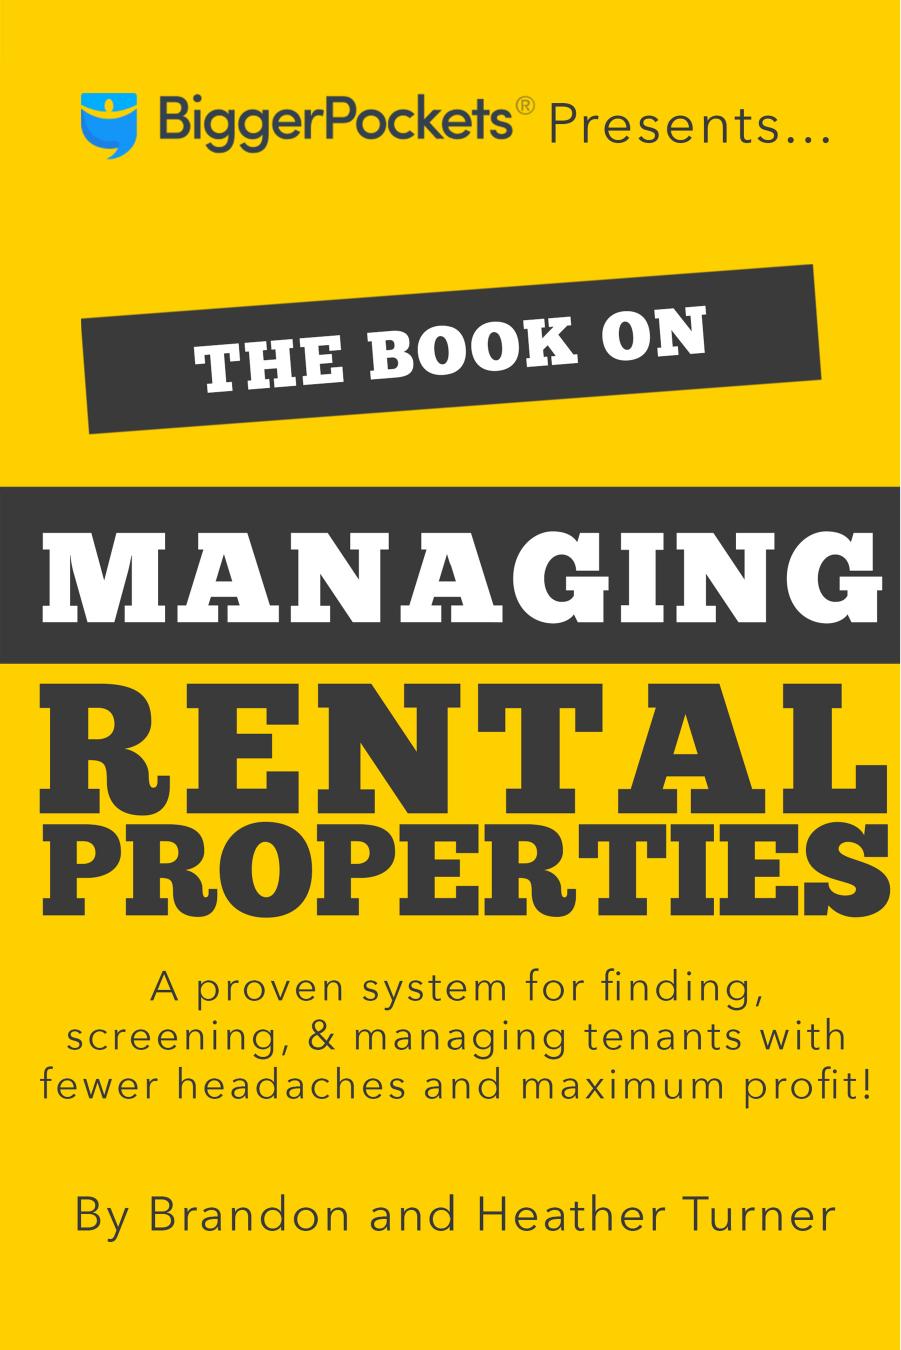 The Book on Managing Rental Properties: A Proven System for Finding, Screening, and Managing Tenants With Fewer Headaches and Greater Profits